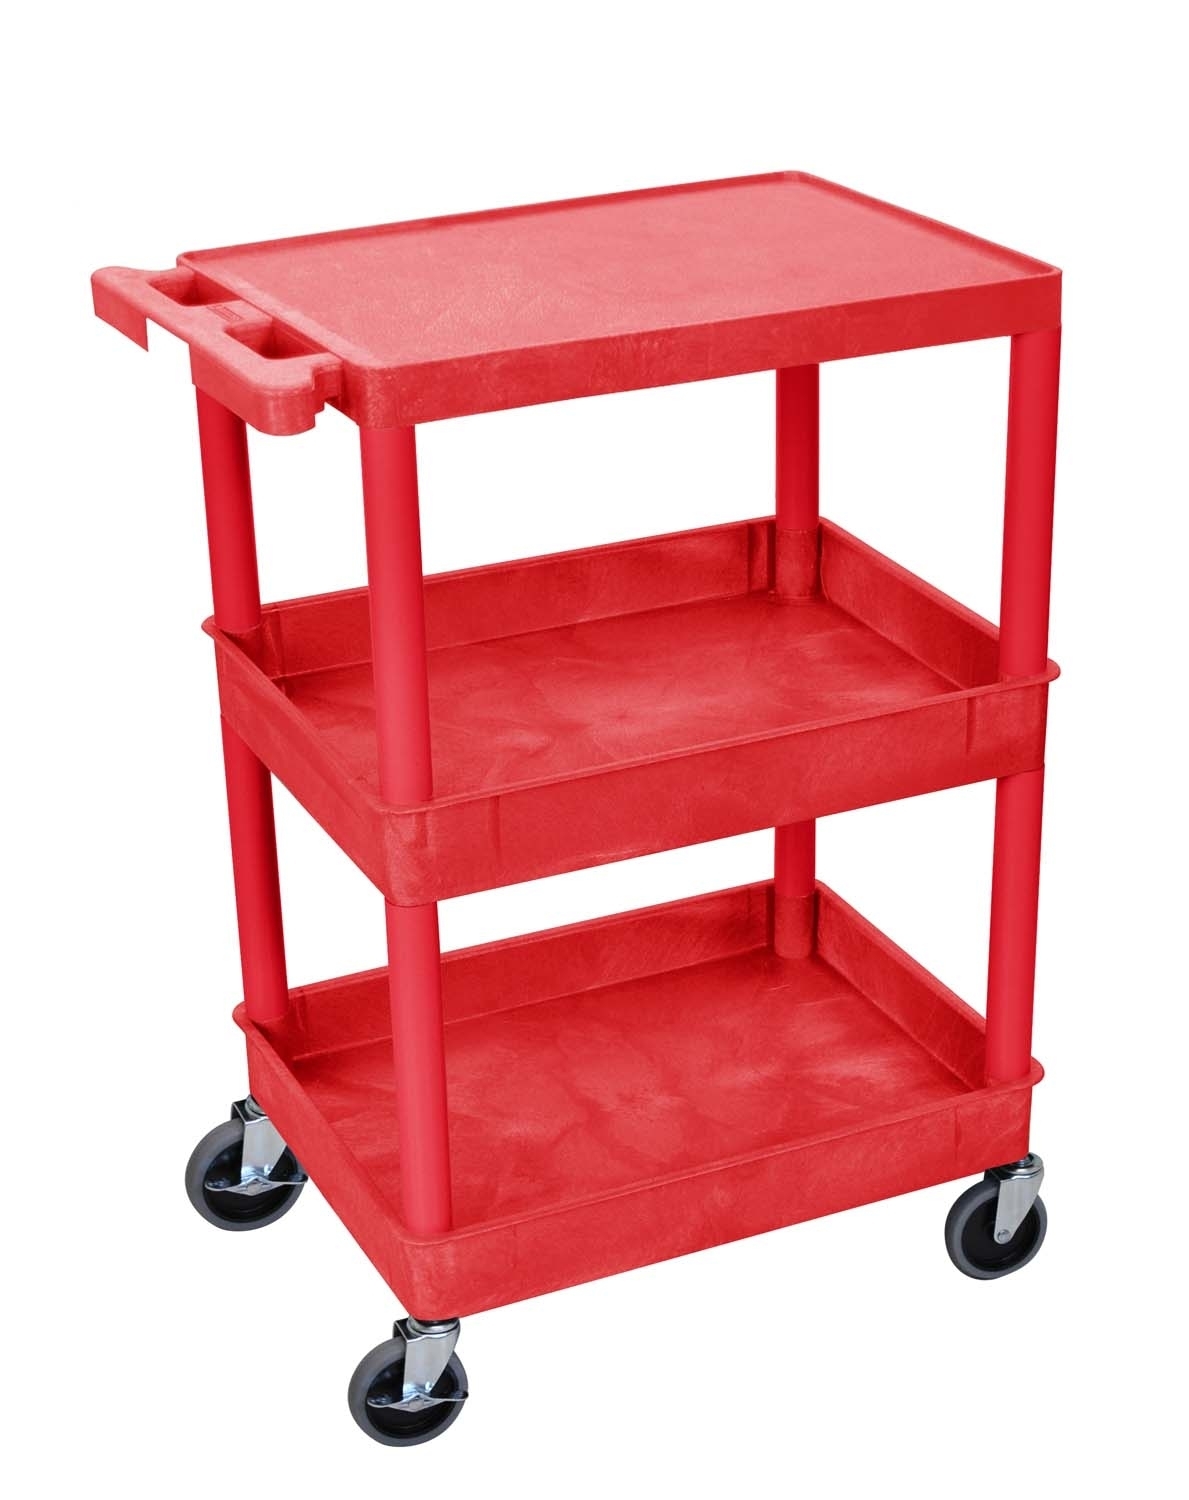 Offex Of-rdstc211rd Flat Top & Tub Middle/bottom Shelf Cart - Red